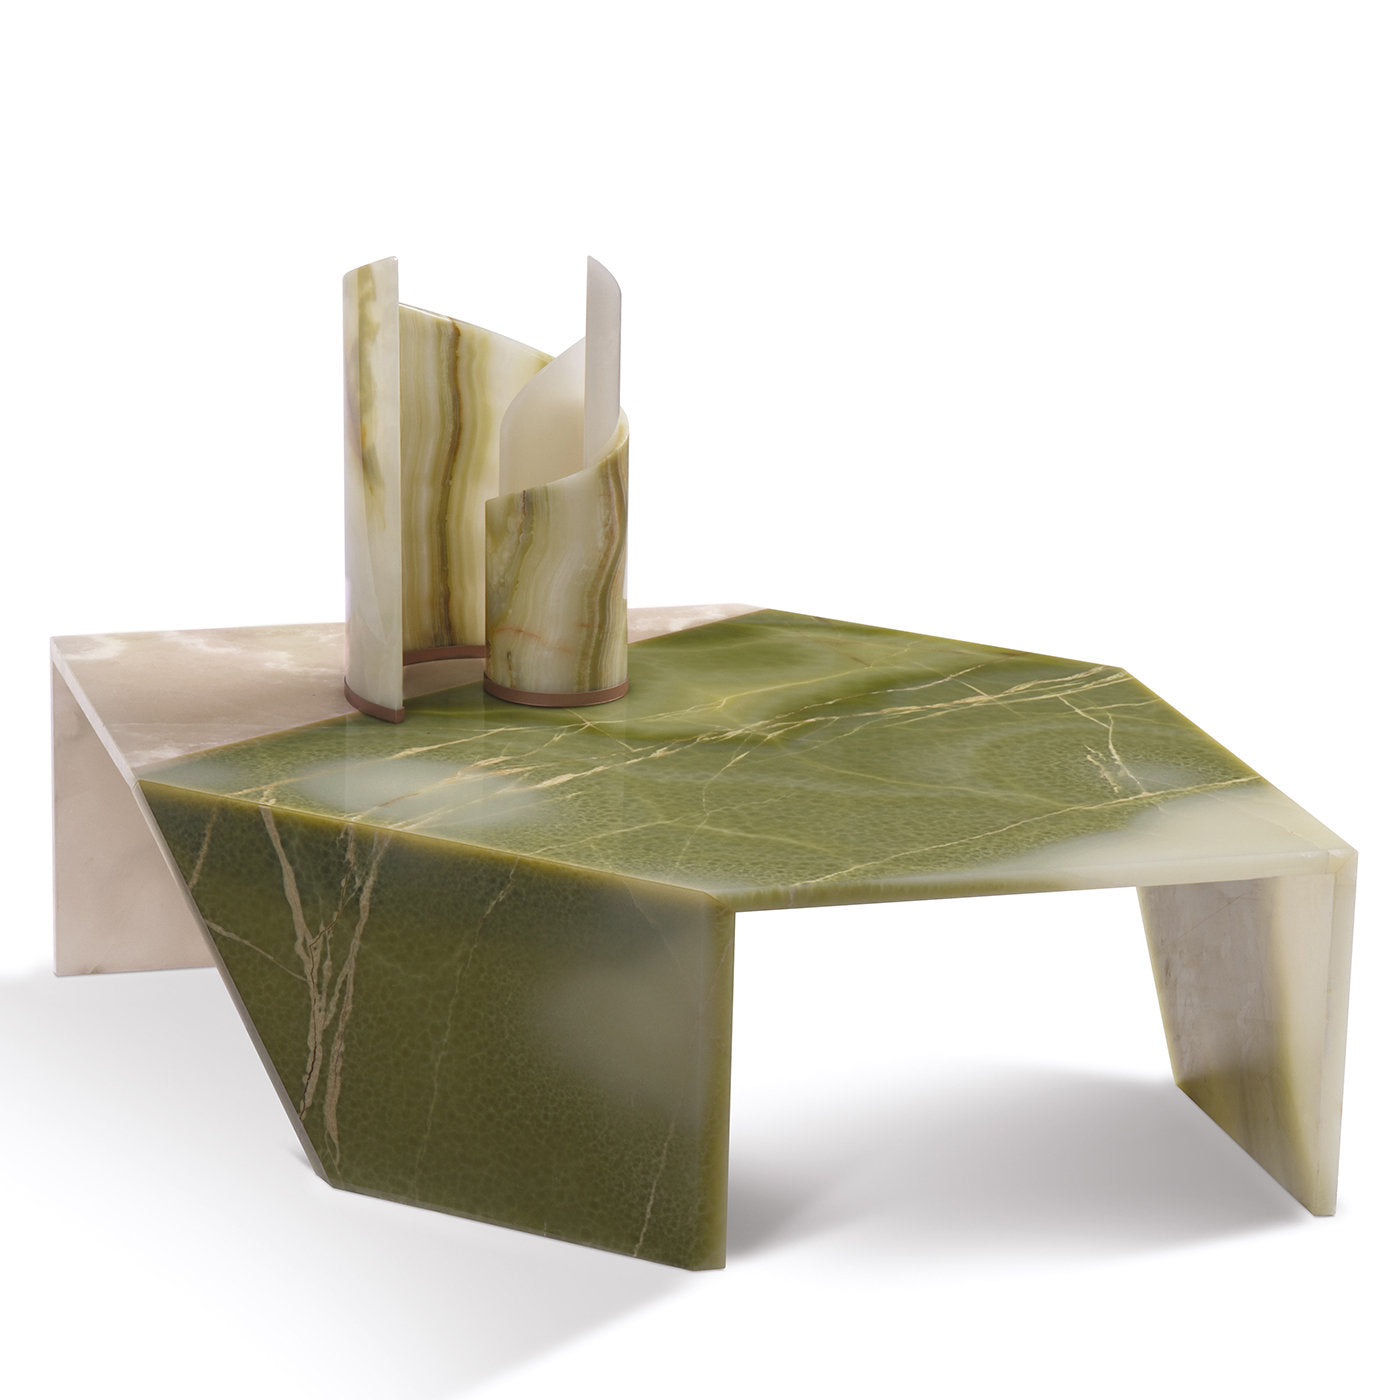 Green and White Origami Table by Patricia Urquiola - Alternative view 2